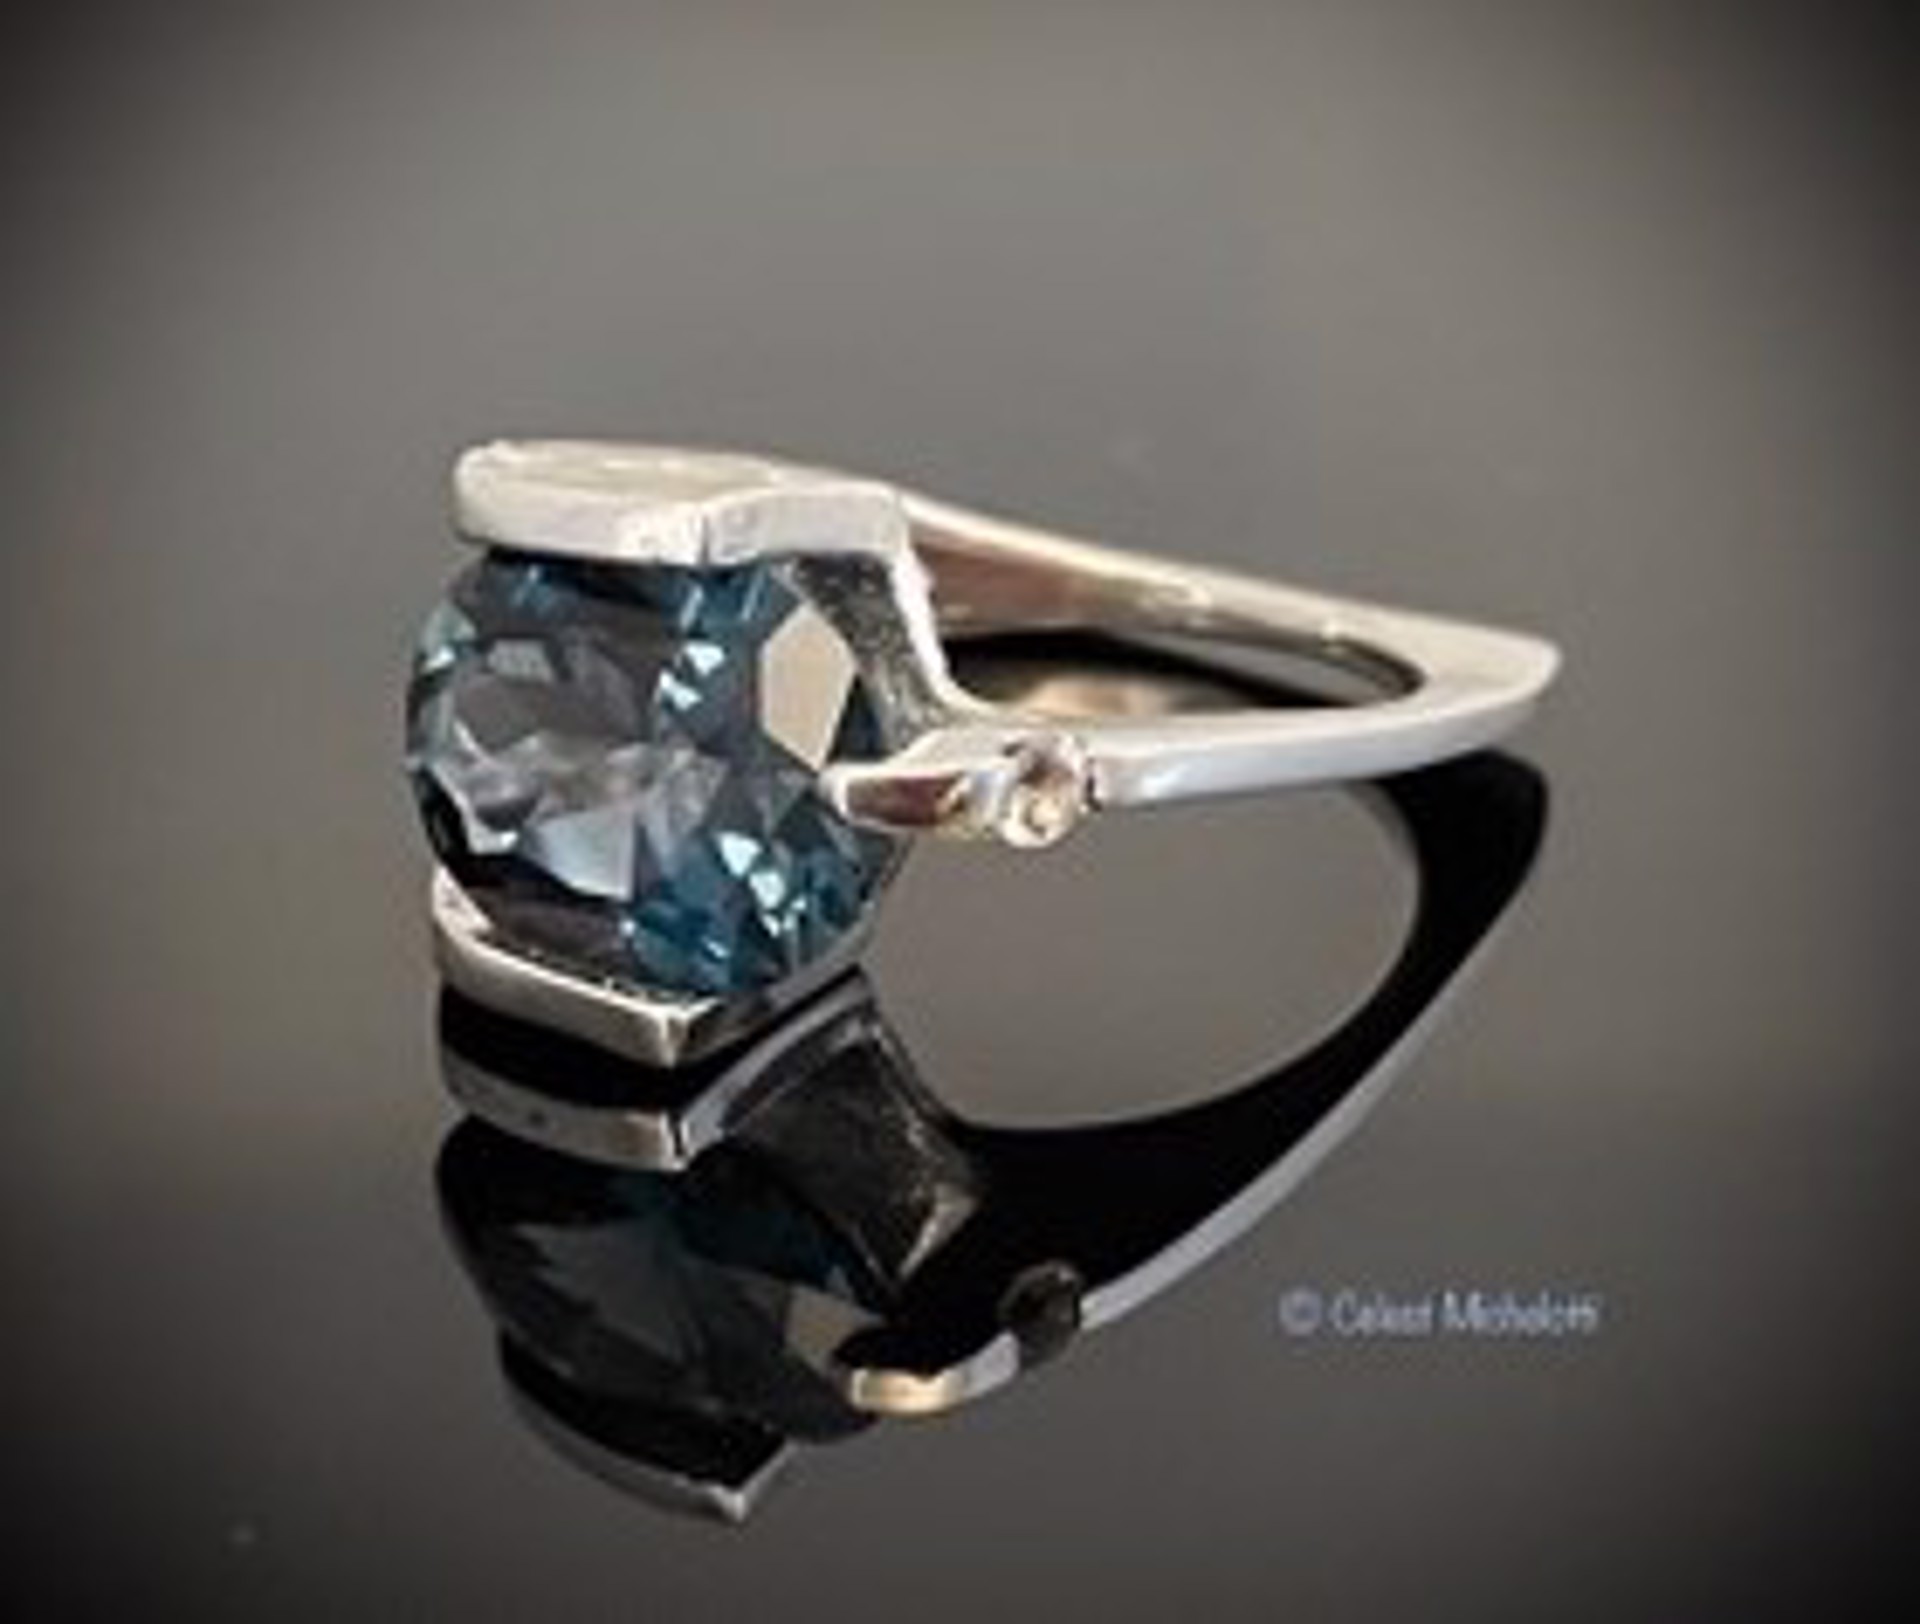 Starry Nights Ring, London Blue Topaz and 3 White Sapphires by Celest Michelotti